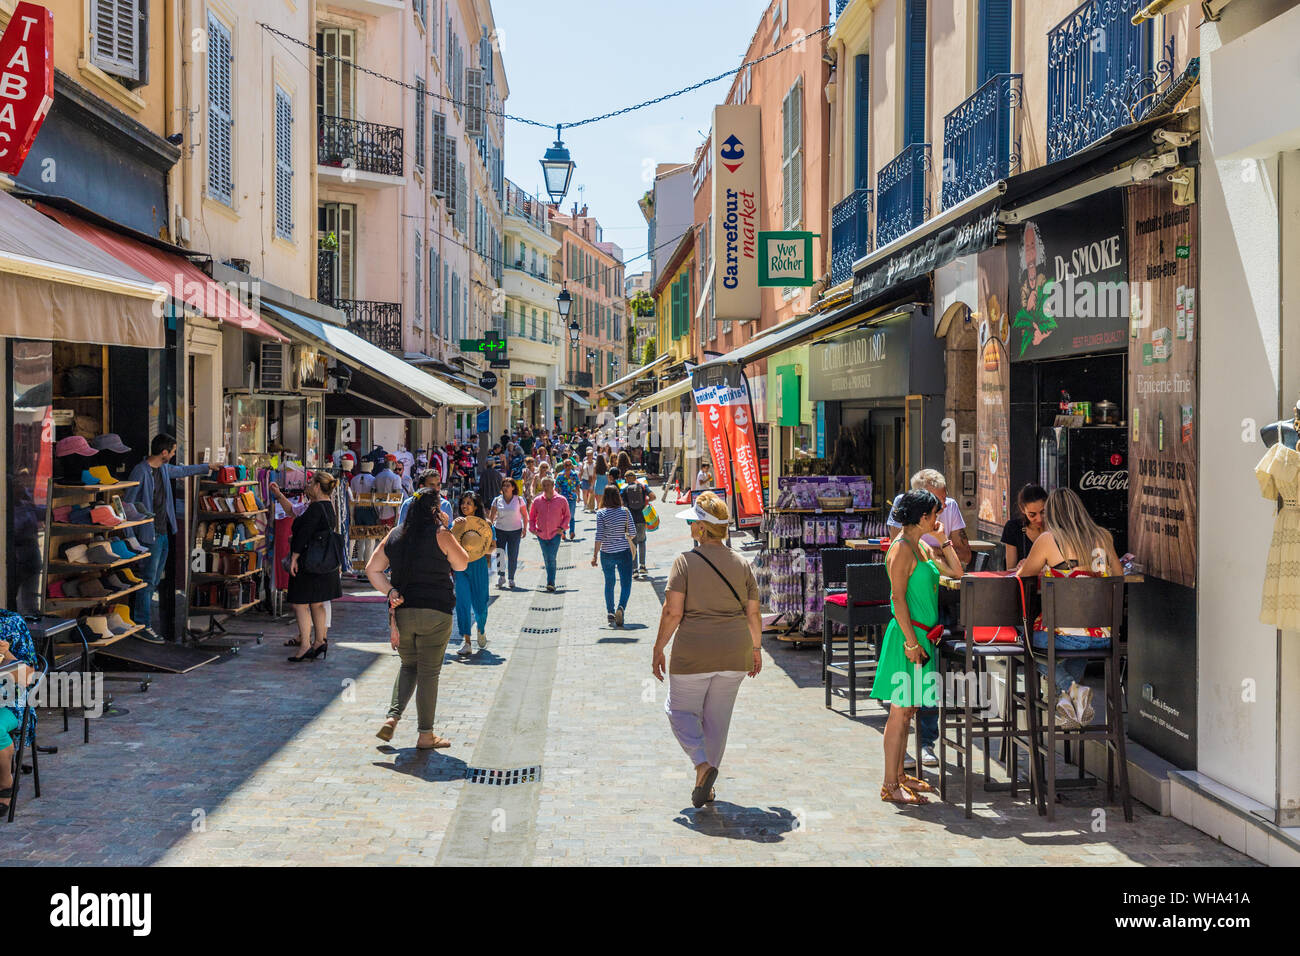 A street scene in Le Suquet old town in Cannes, Alpes Maritimes, Cote d'Azur, French Riviera, France, Mediterranean, Europe Stock Photo